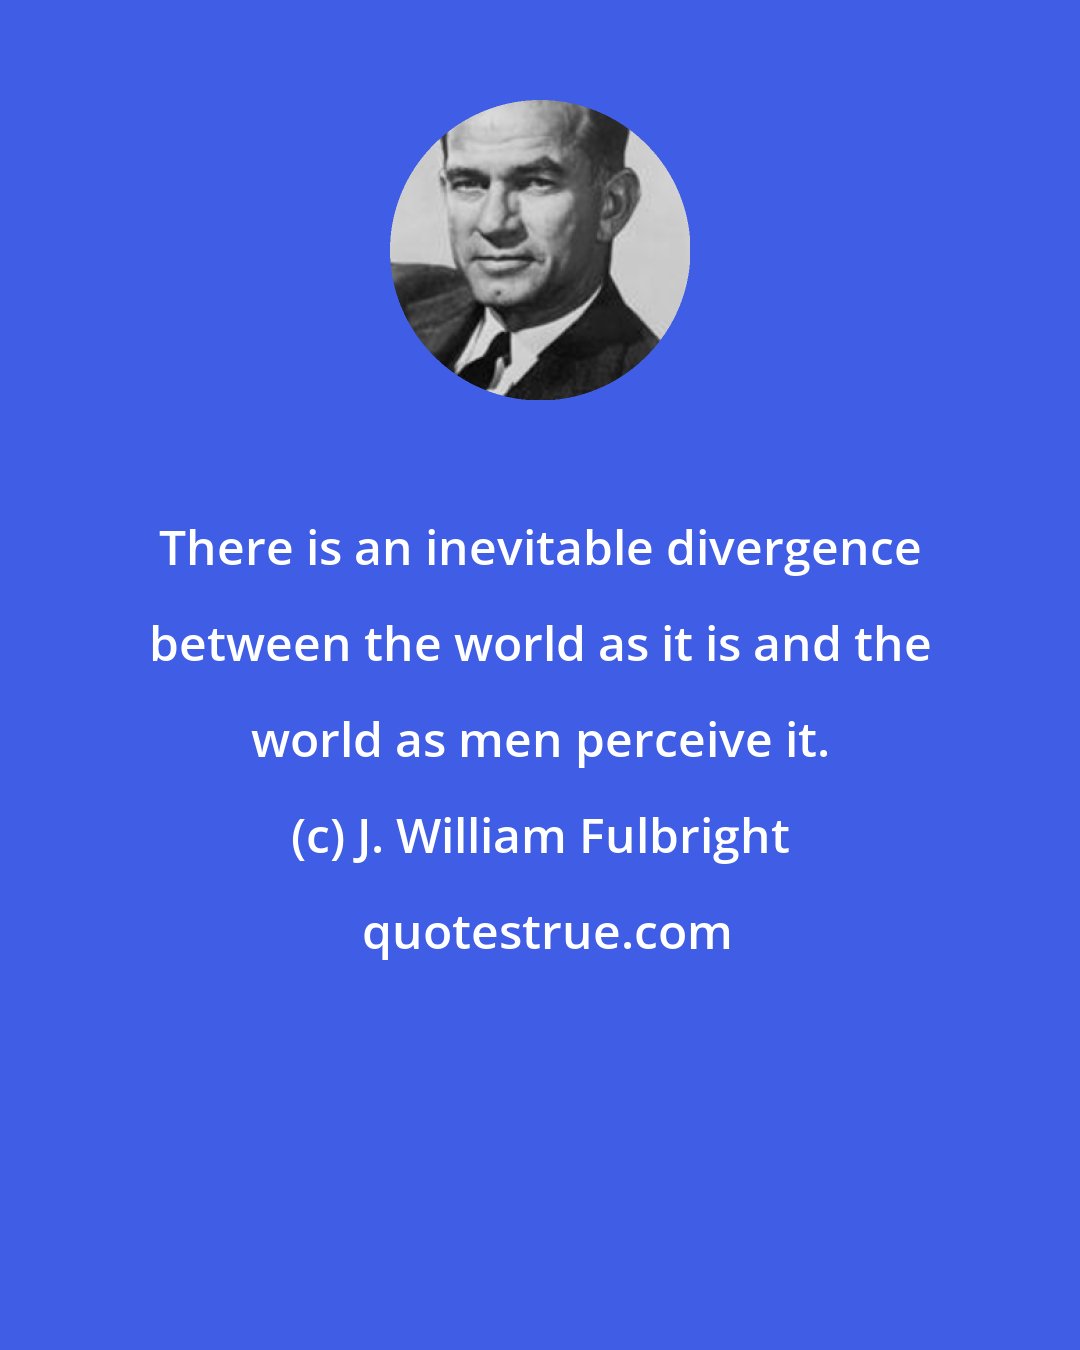 J. William Fulbright: There is an inevitable divergence between the world as it is and the world as men perceive it.